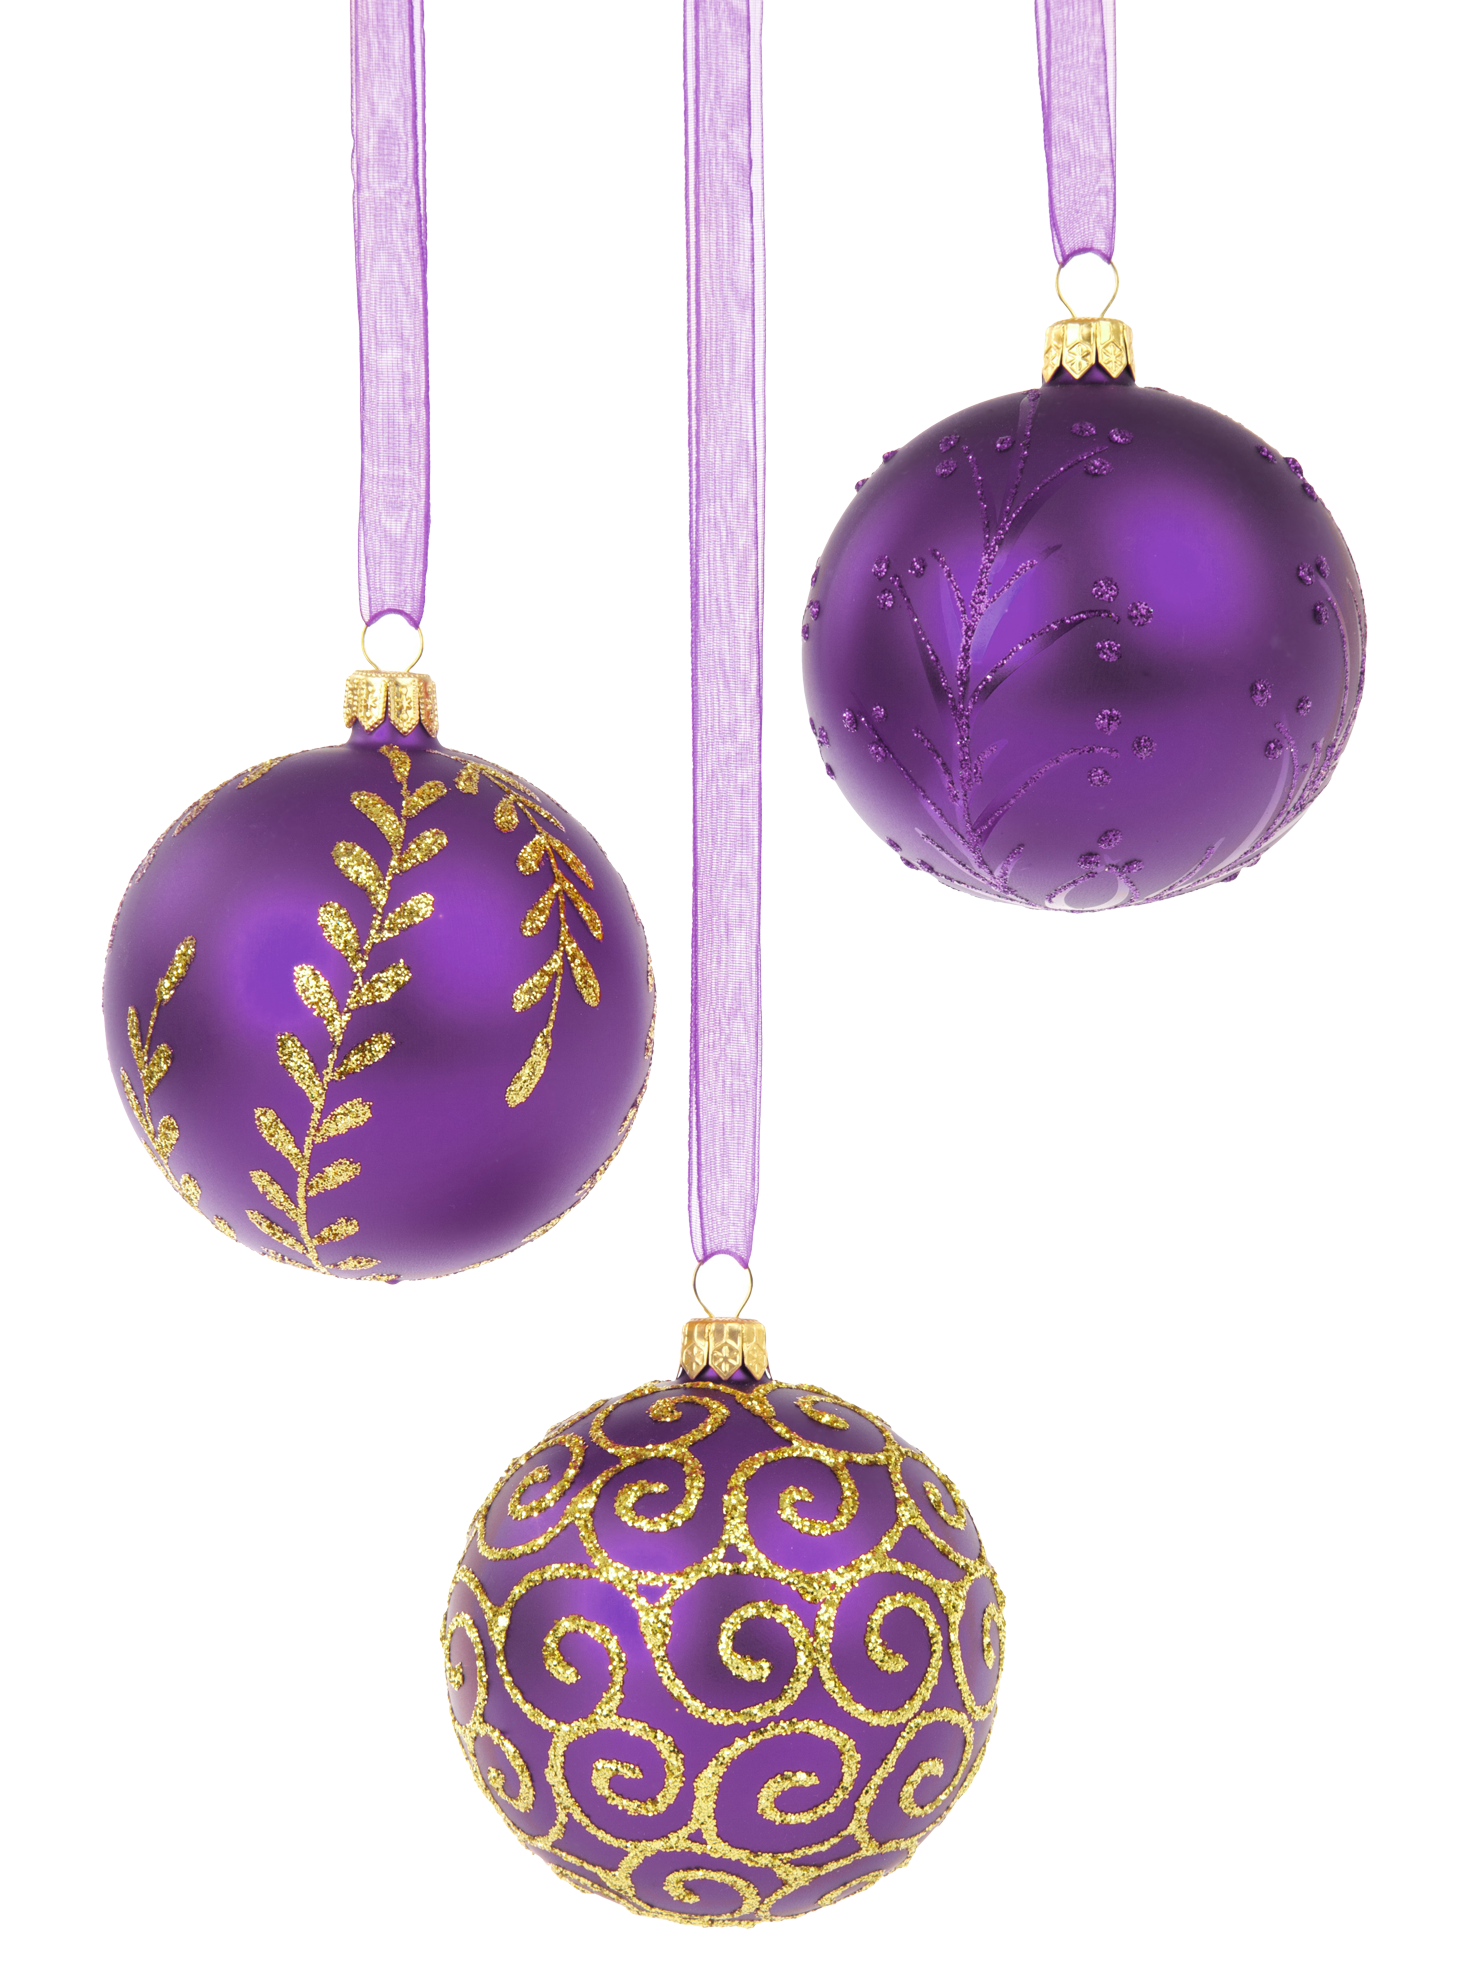 Purple Christmas Ornaments Free Clipart HQ PNG Image